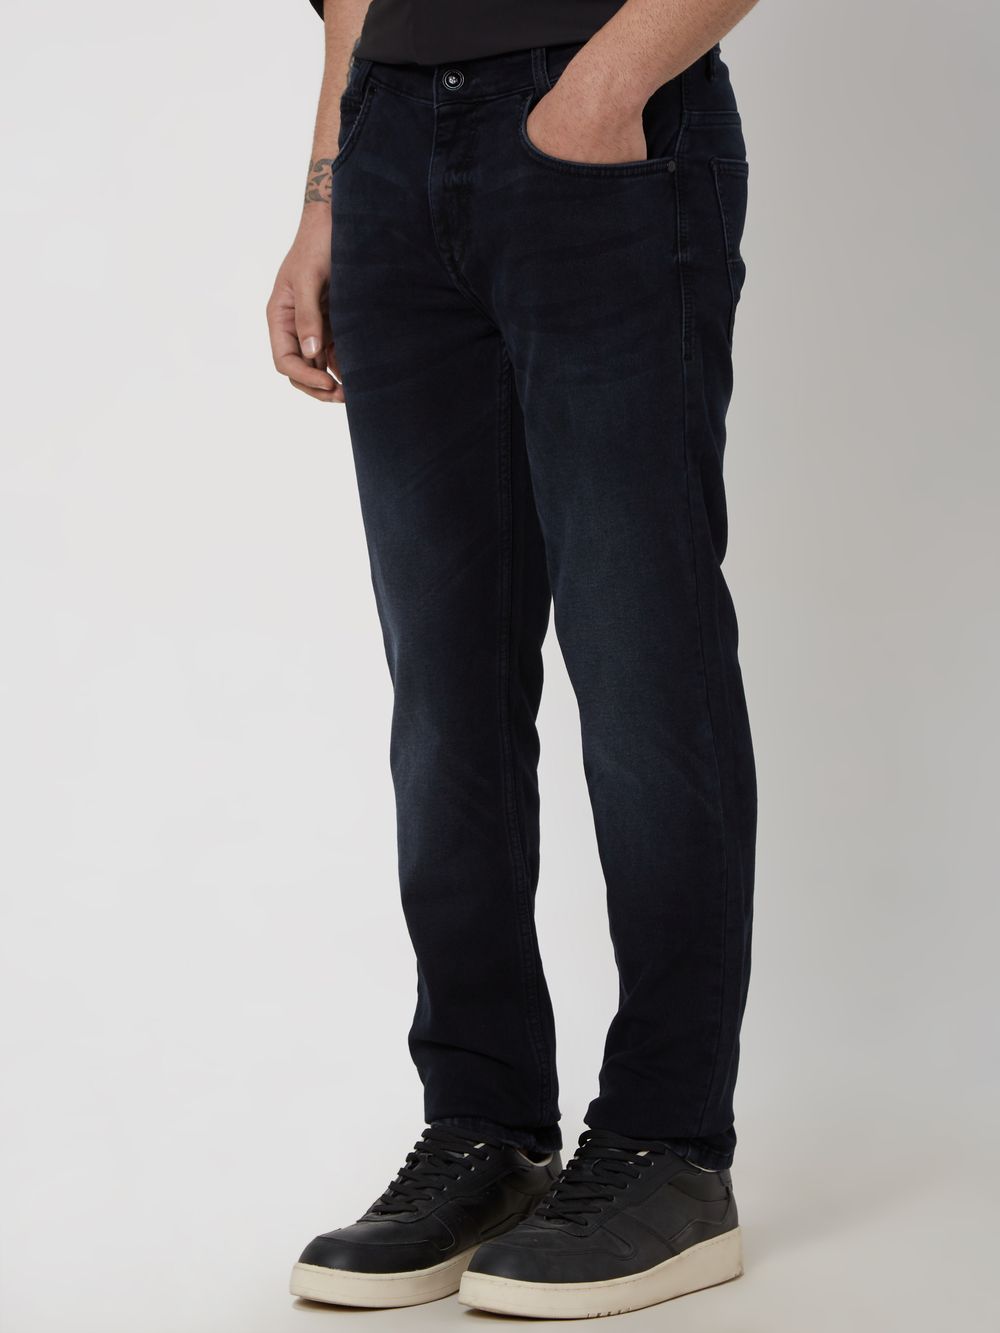 Black Narrow Fit Denim Deluxe Stretch Jeans